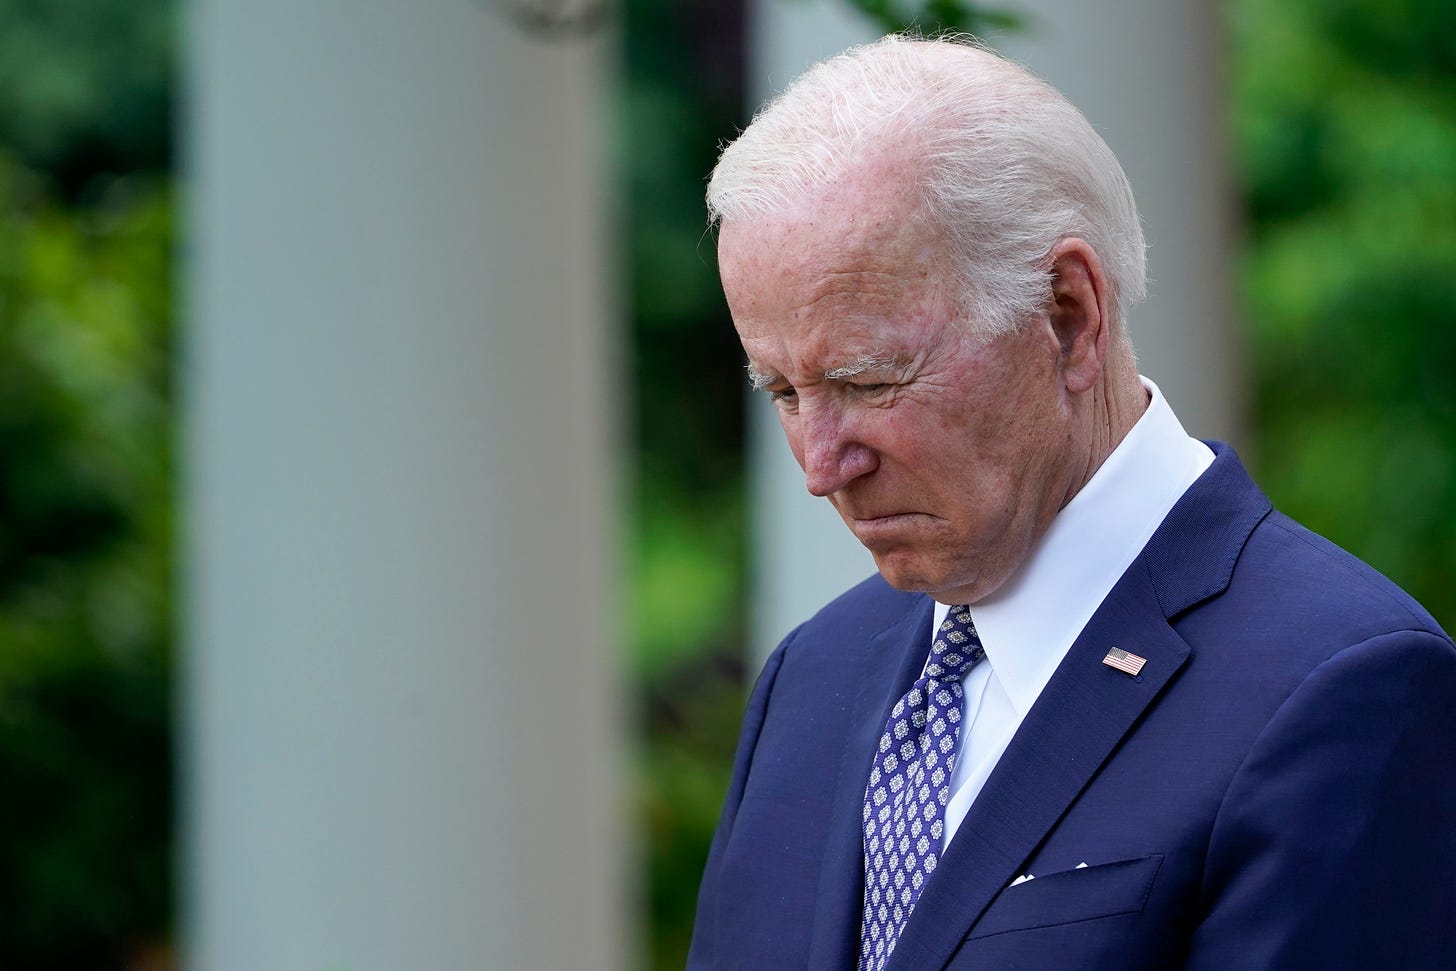 Readers sound off on President Biden, Verizon's rates and the death penalty  – New York Daily News